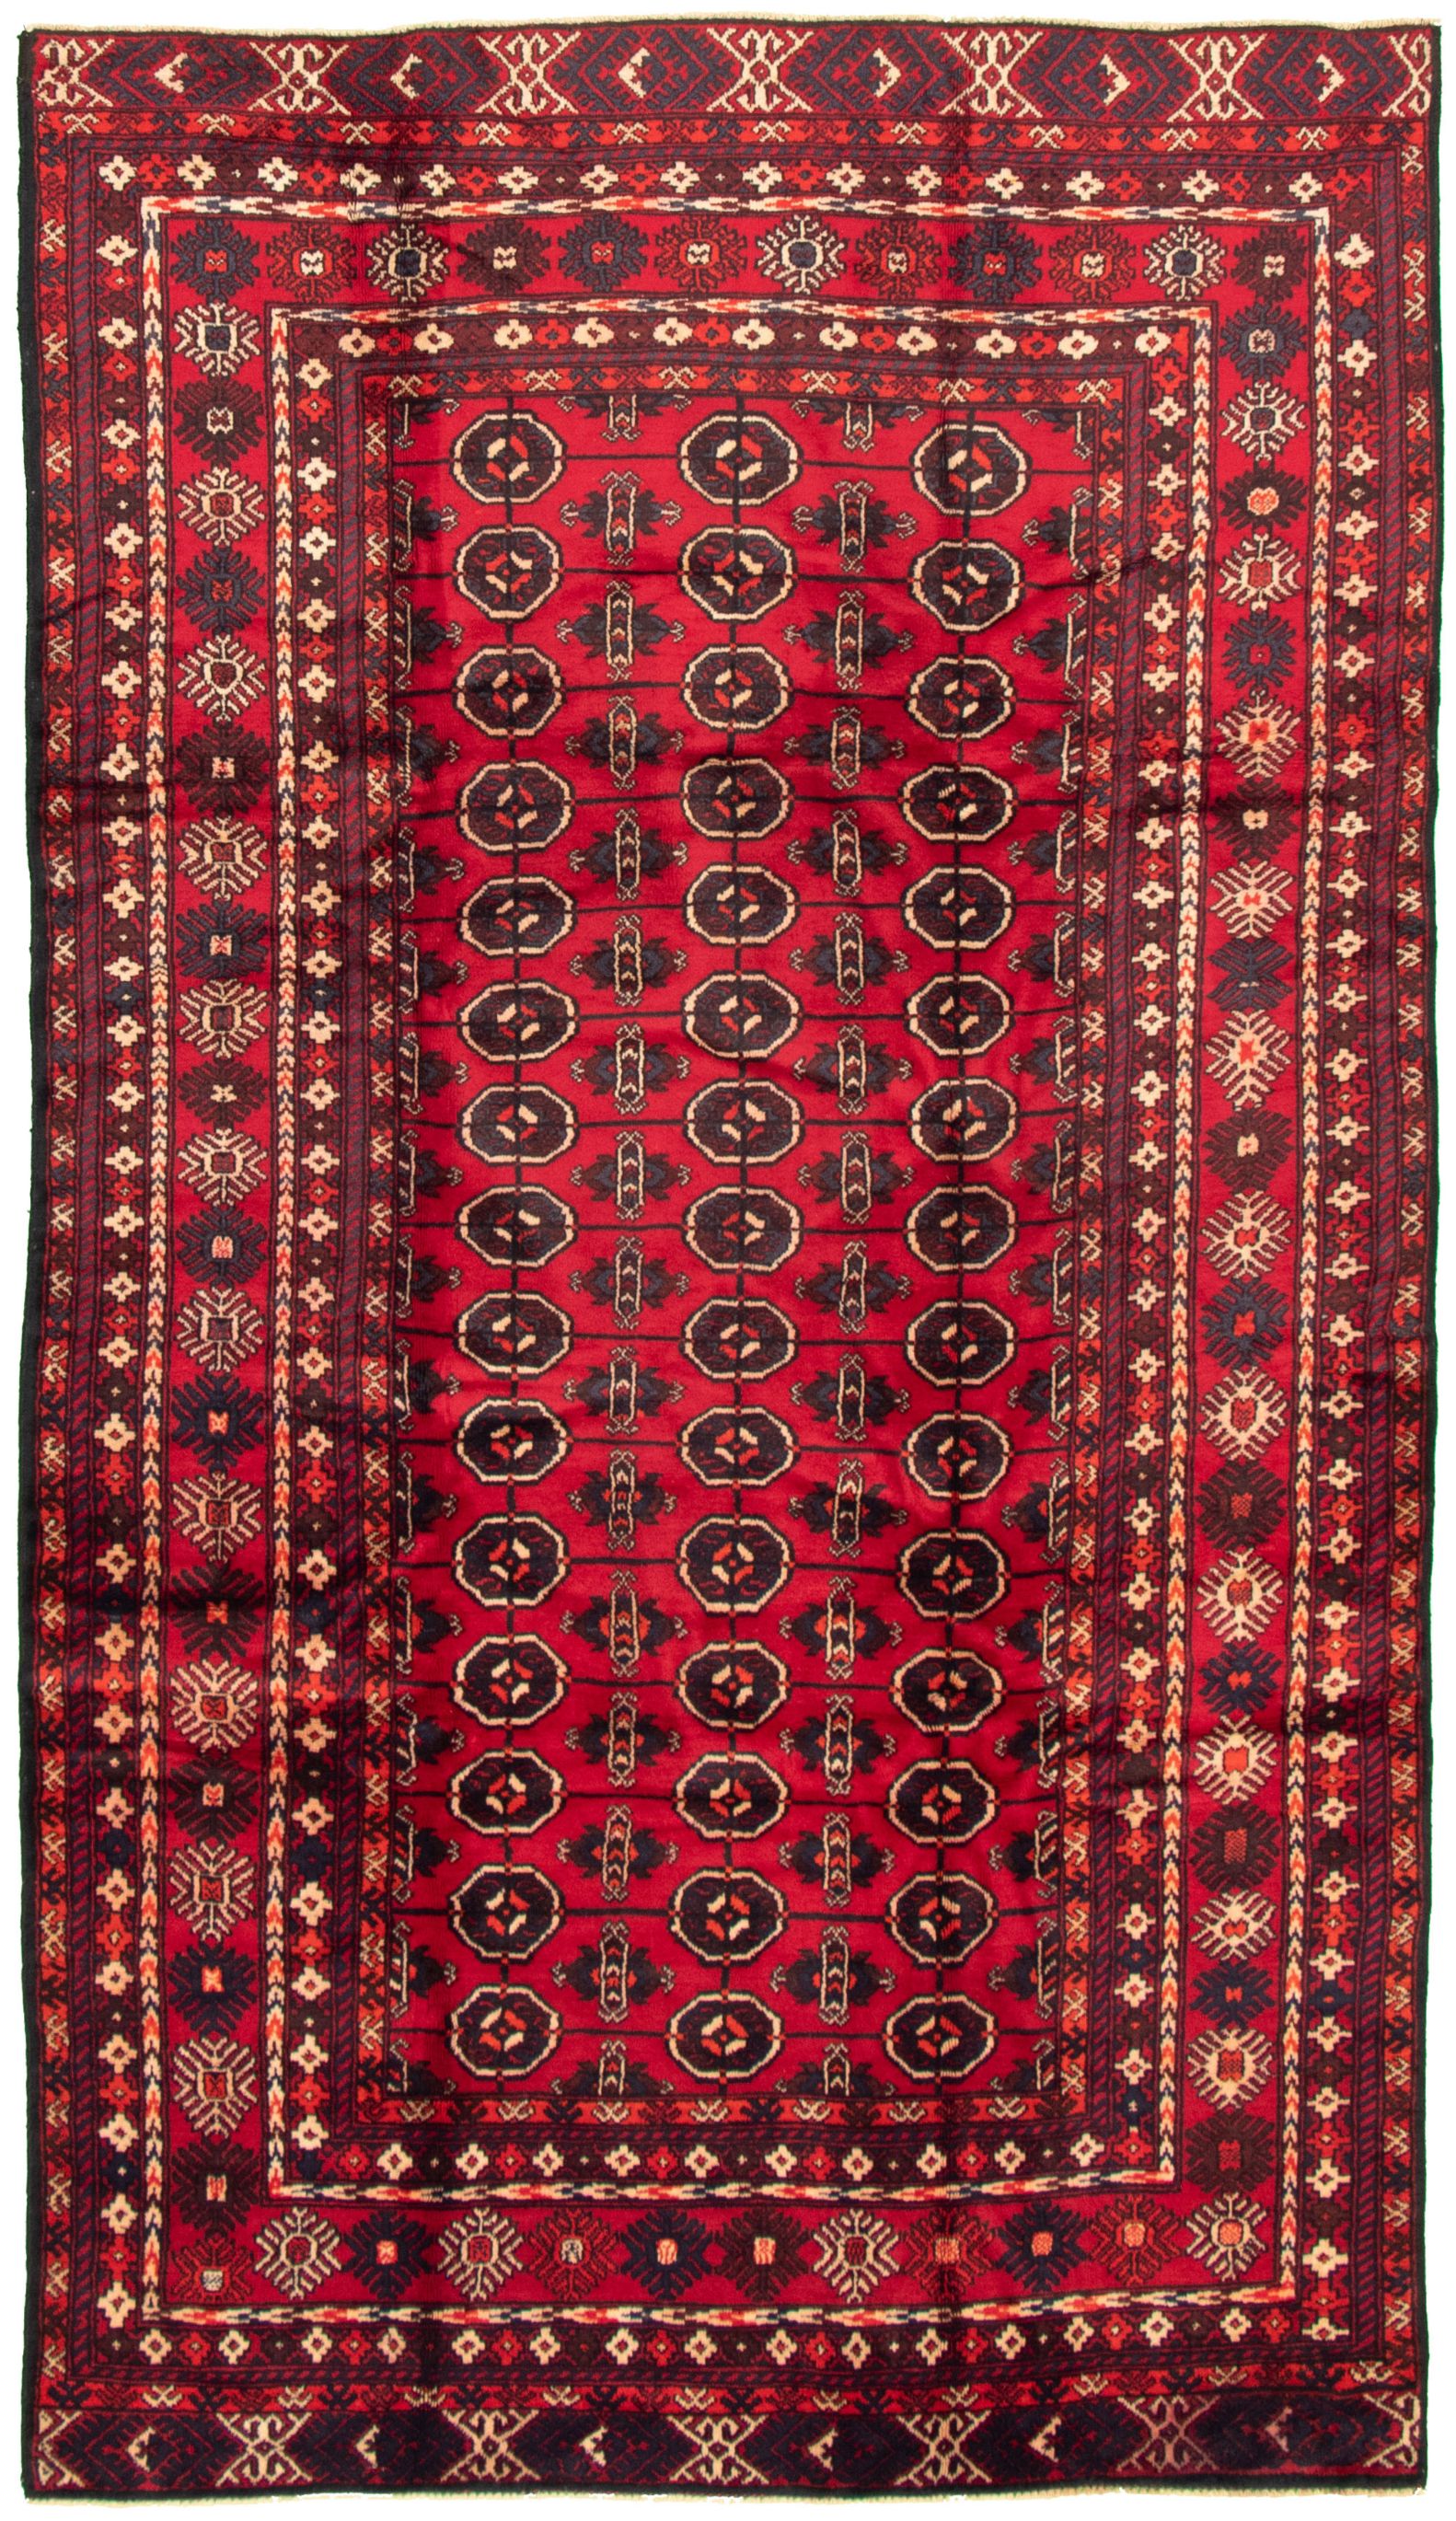 Hand-knotted Teimani Red Wool Rug 5'7" x 9'10" Size: 5'7" x 9'10"  